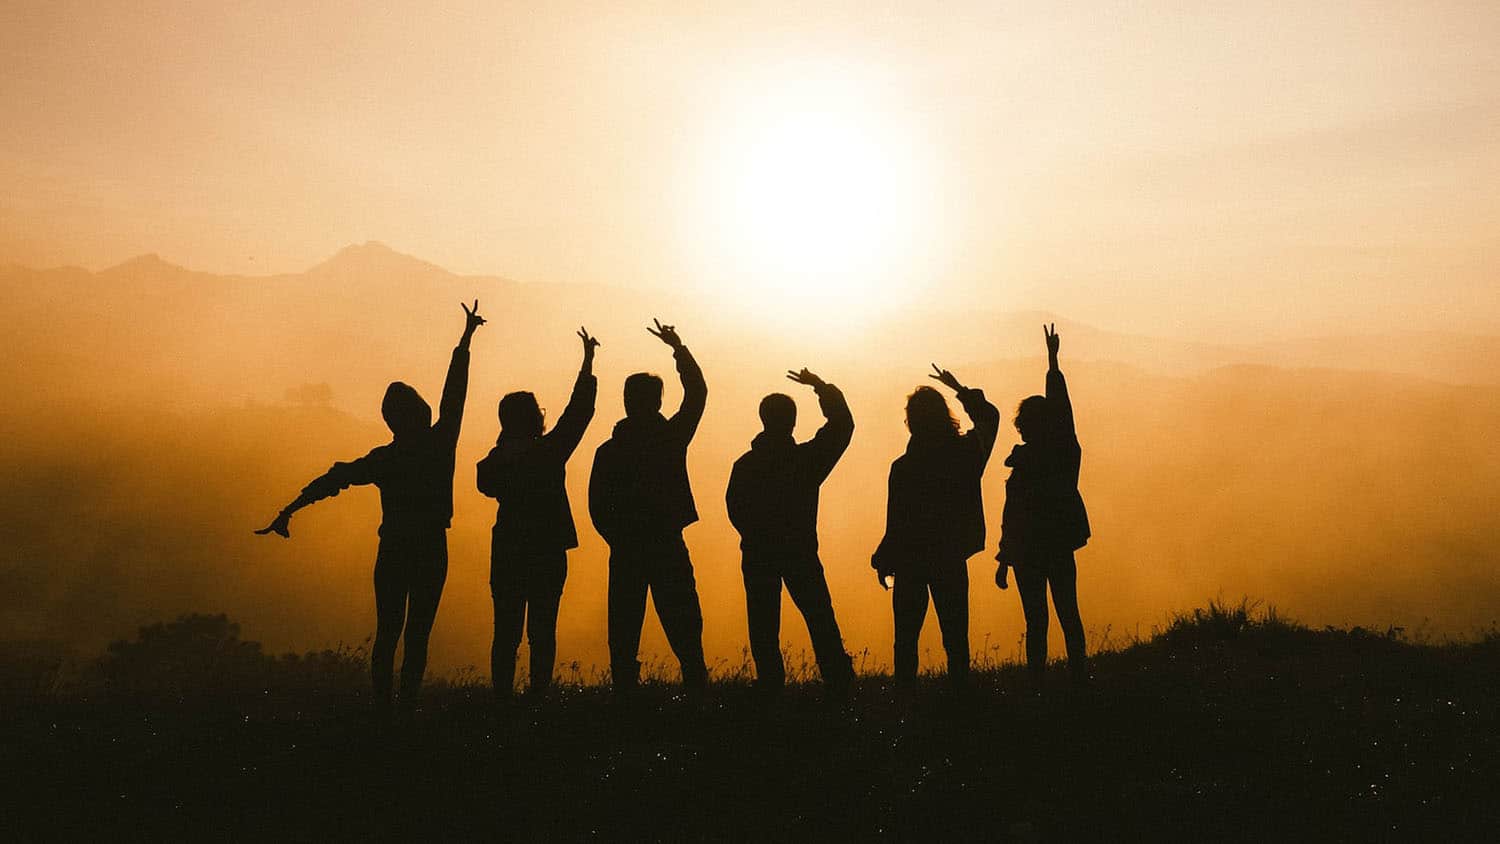 group of people silhouetted against a sunrise